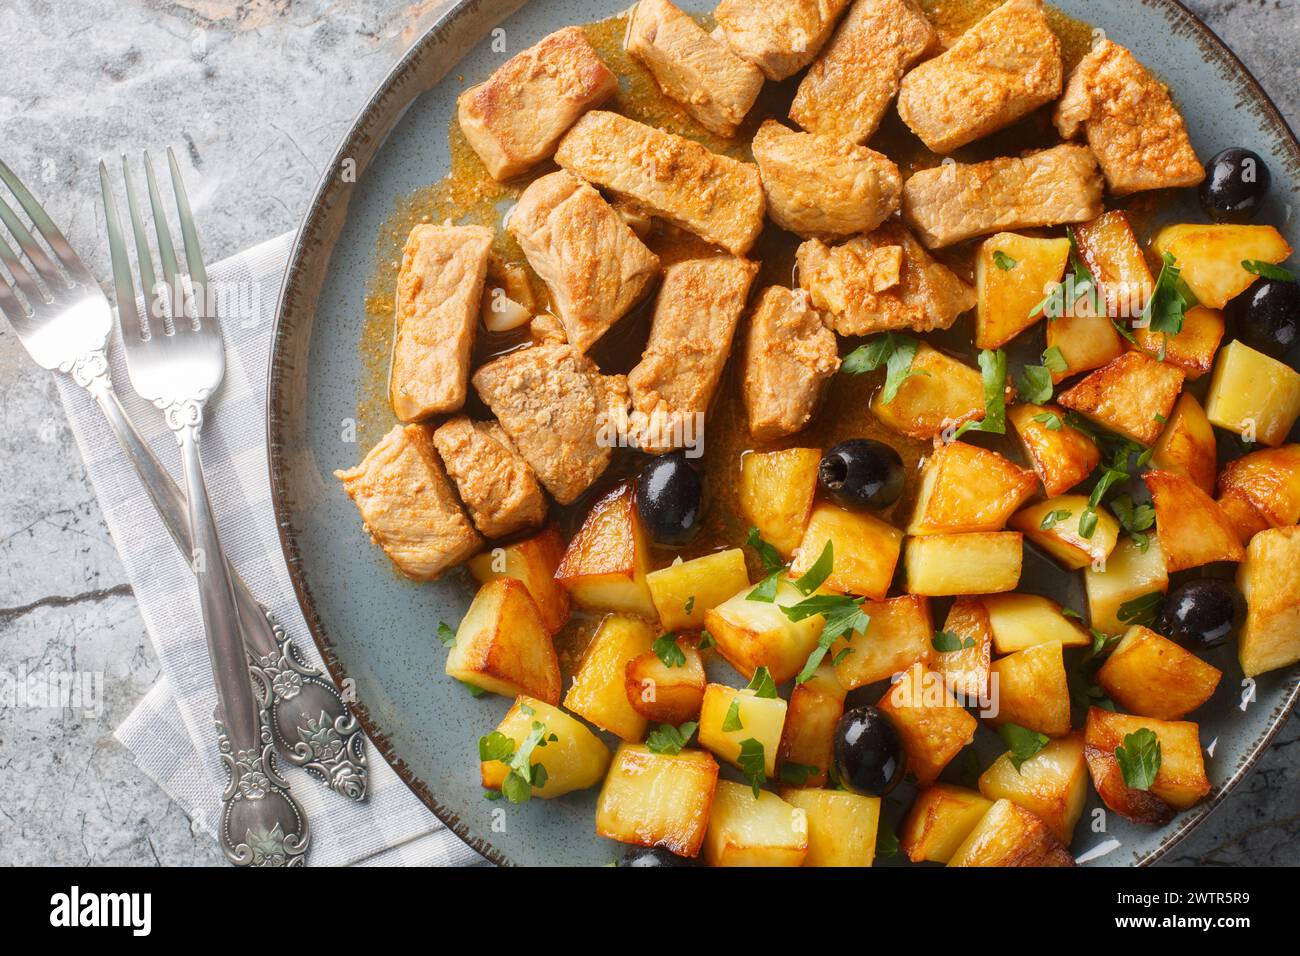 Rojoes Portuguese dish of fried pork cubes and potatoes closeup on the plate on the table. Horizontal top view from above Stock Photo